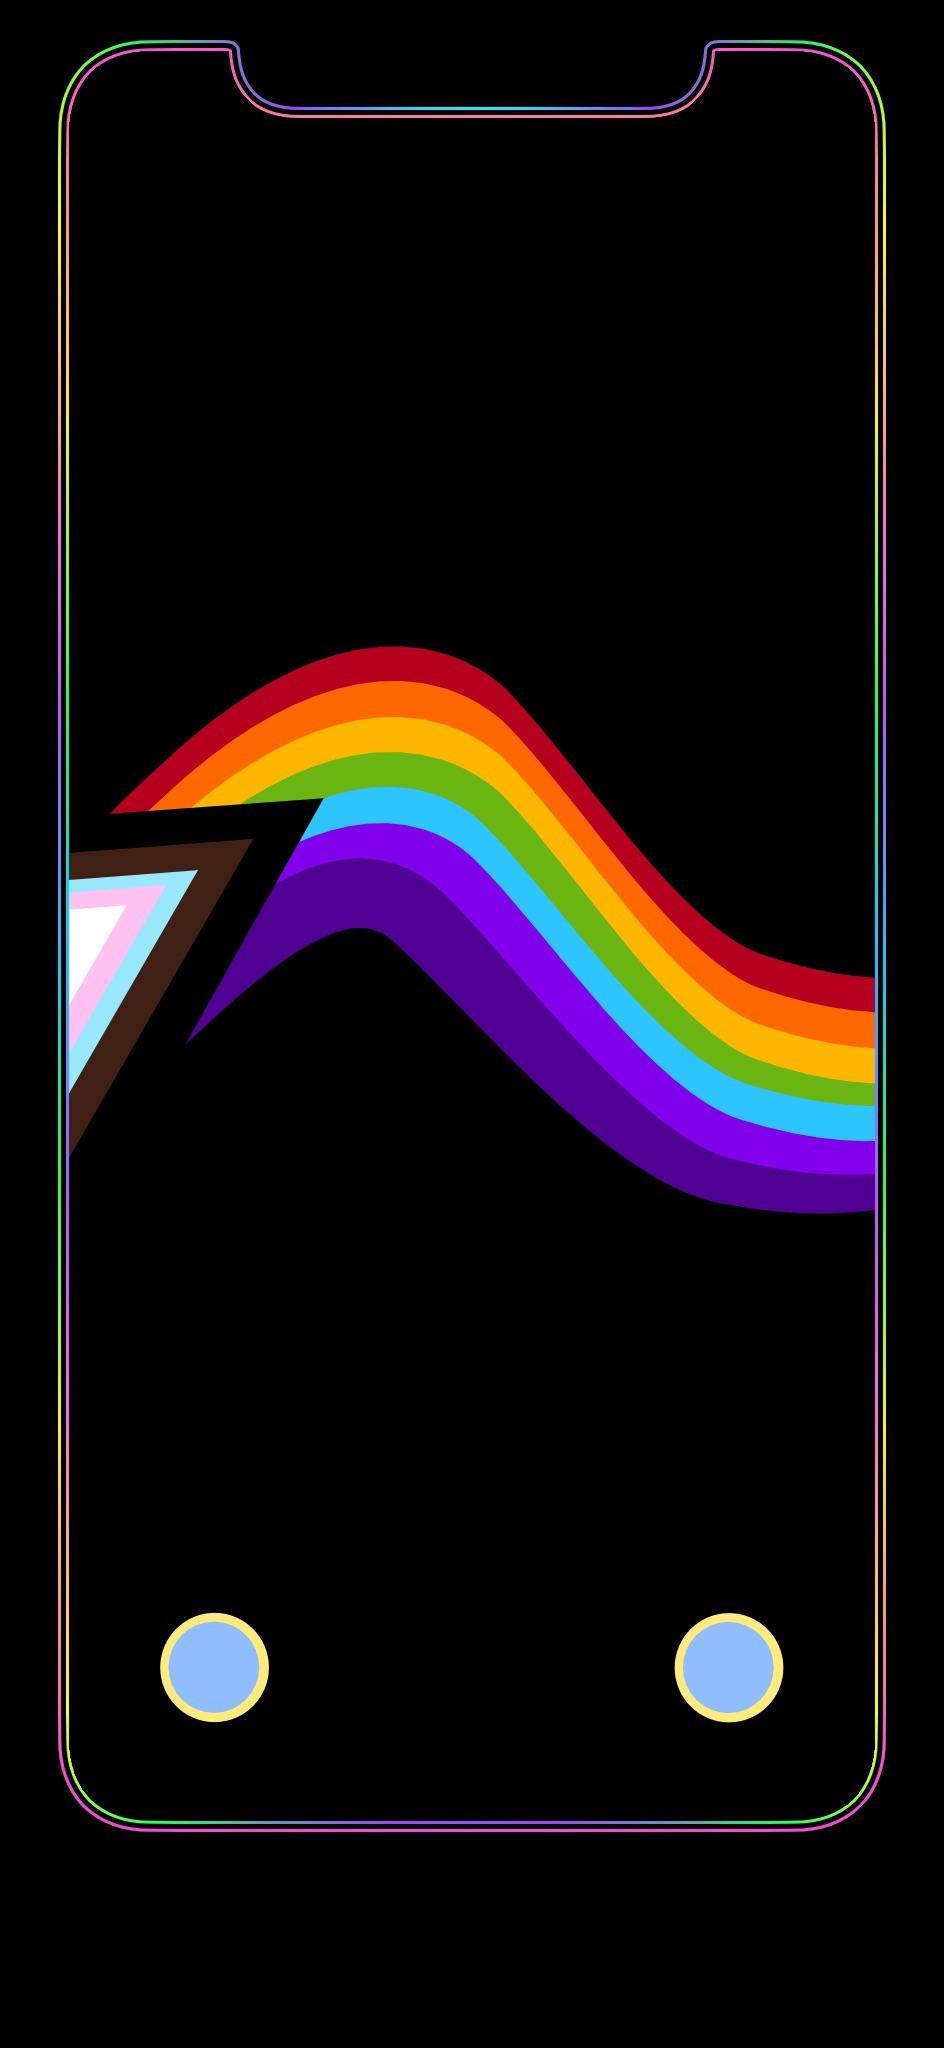 LGBTQ+ Pride Flag w/ border (link in comments). iPhone